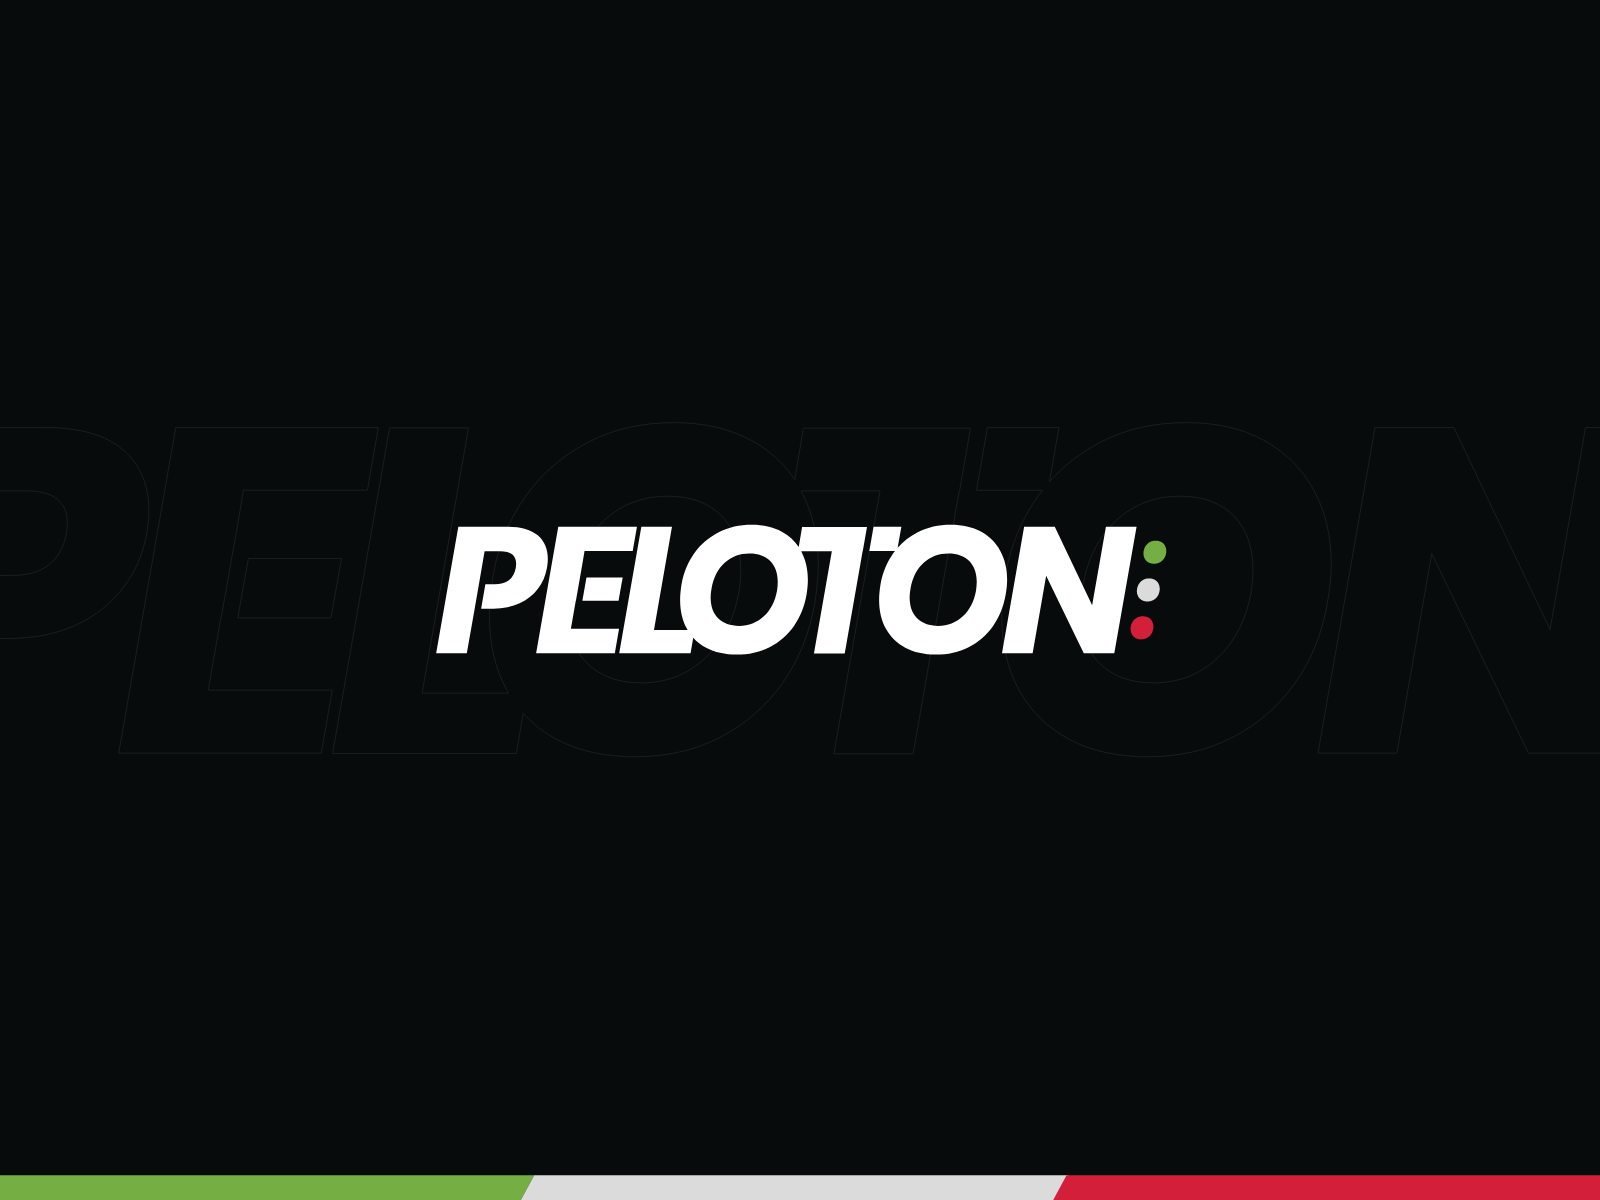 The Black Peloton Logo' Poster by Red Veles | Displate